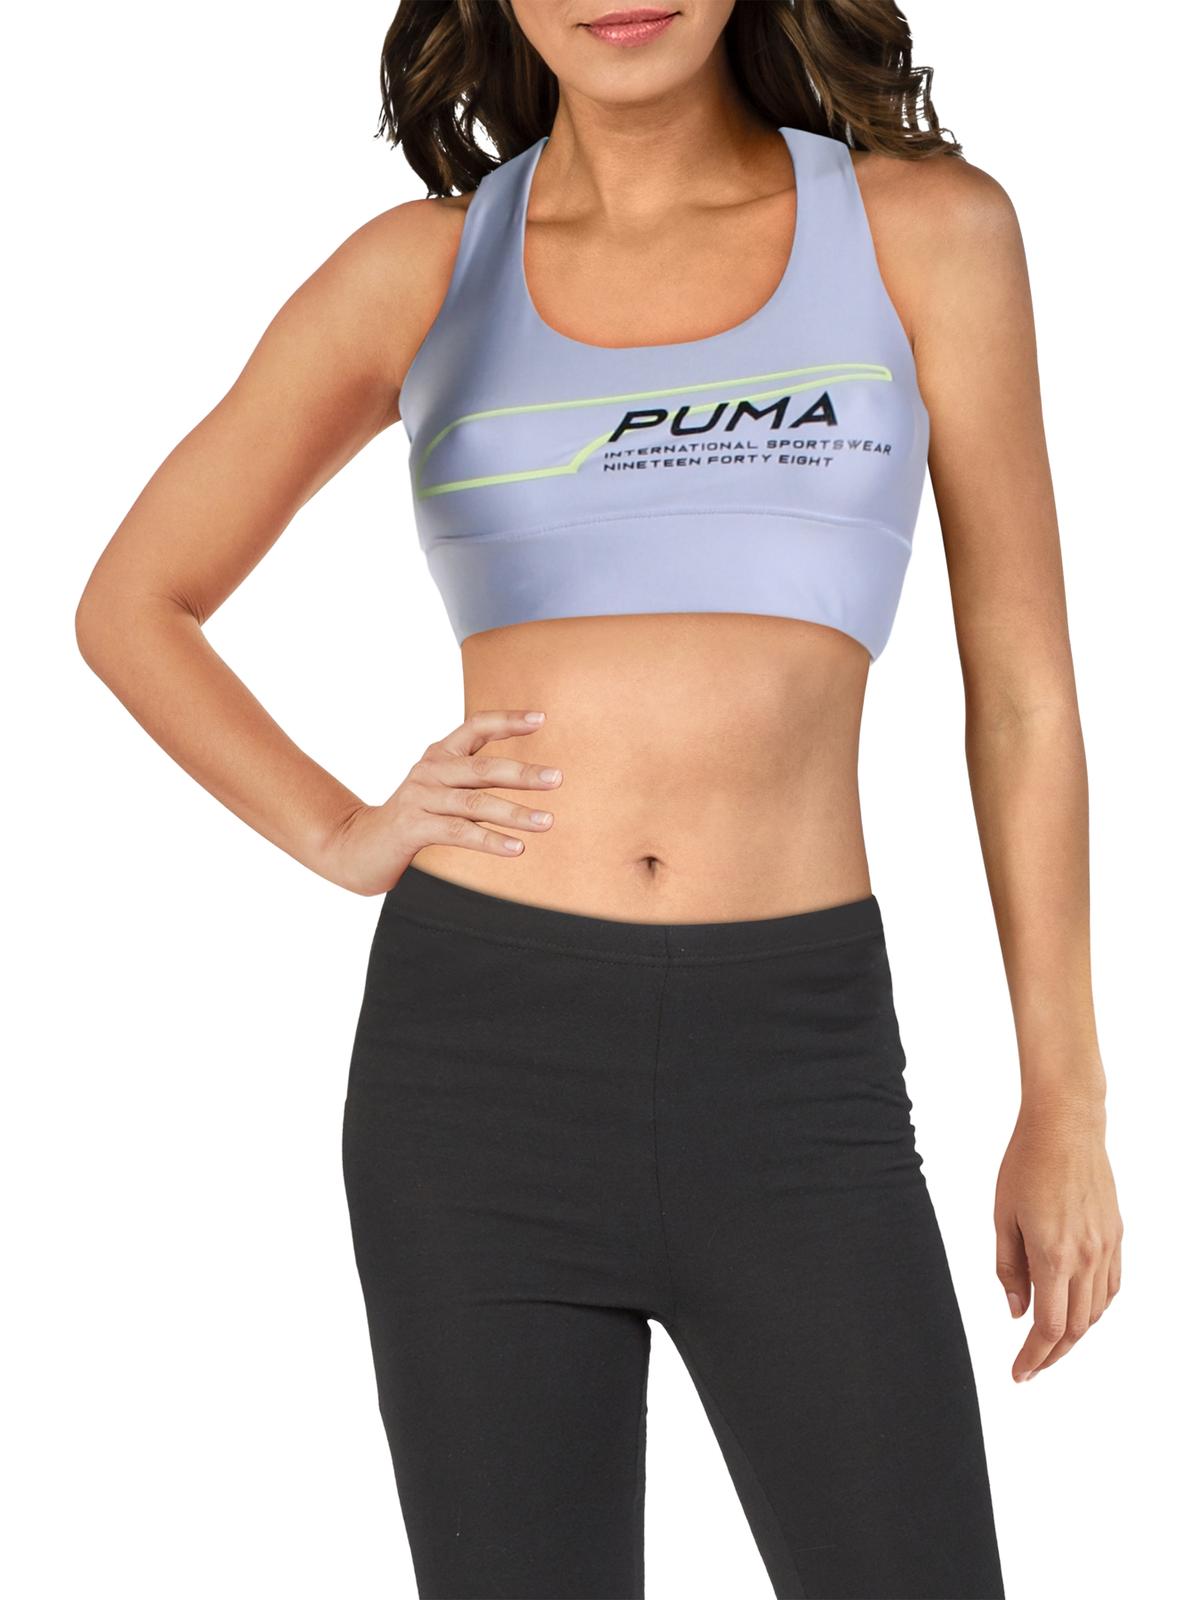 Puma Womens Evide Running Fitness Crop Top - image 1 of 2